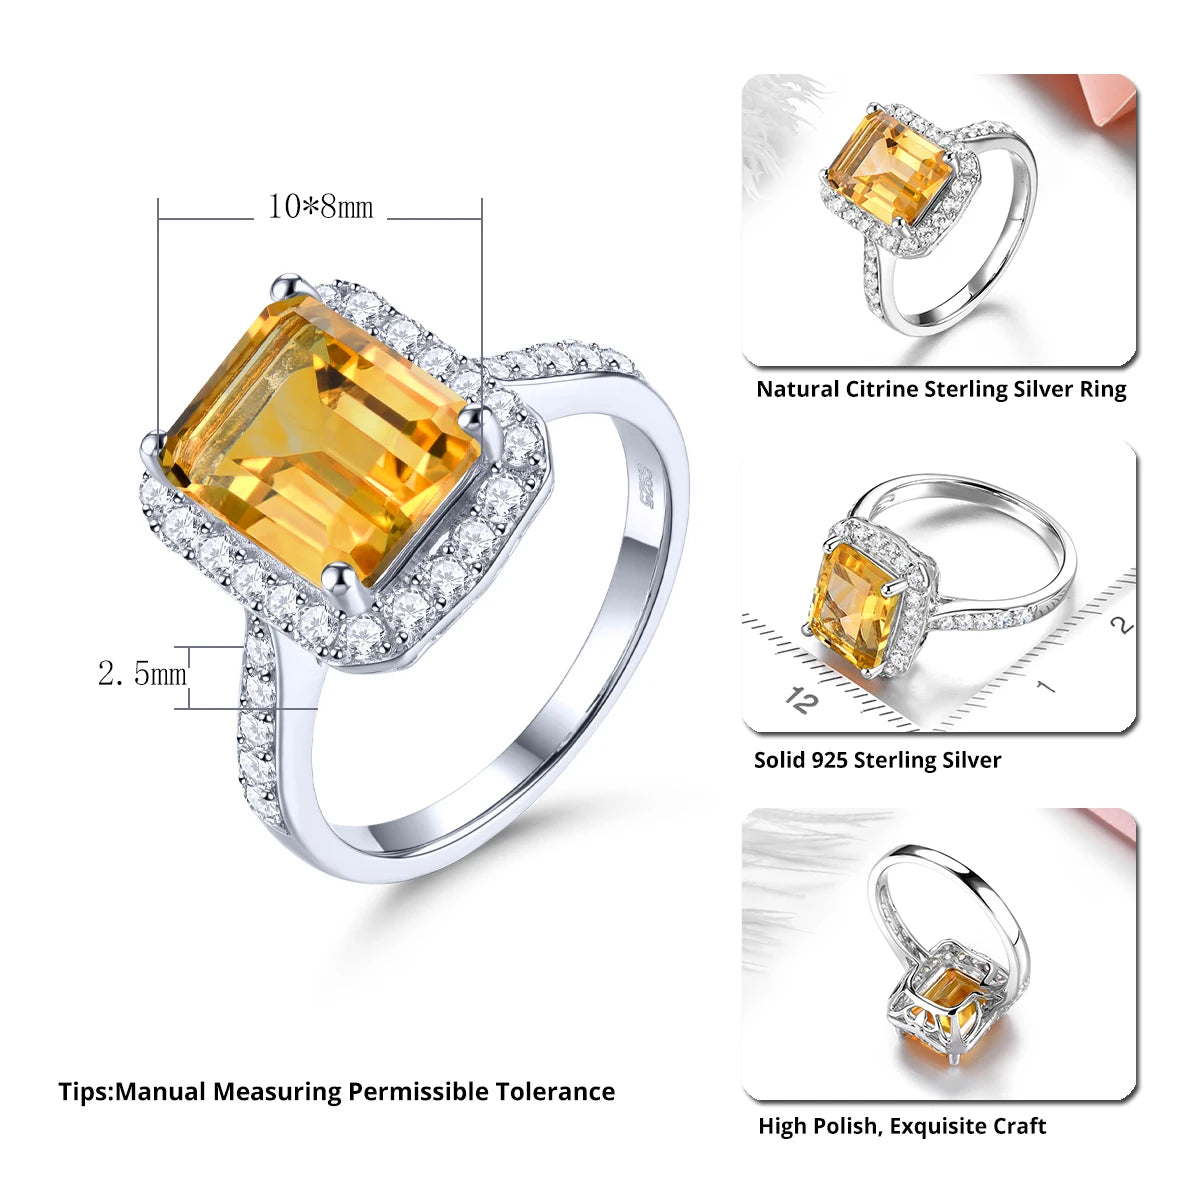 Natural Citrine Solid Silver Rings Women Jewelrys 3 Carats Genuien Crystal Luxury Classic Design Anniversary S925 Gifts